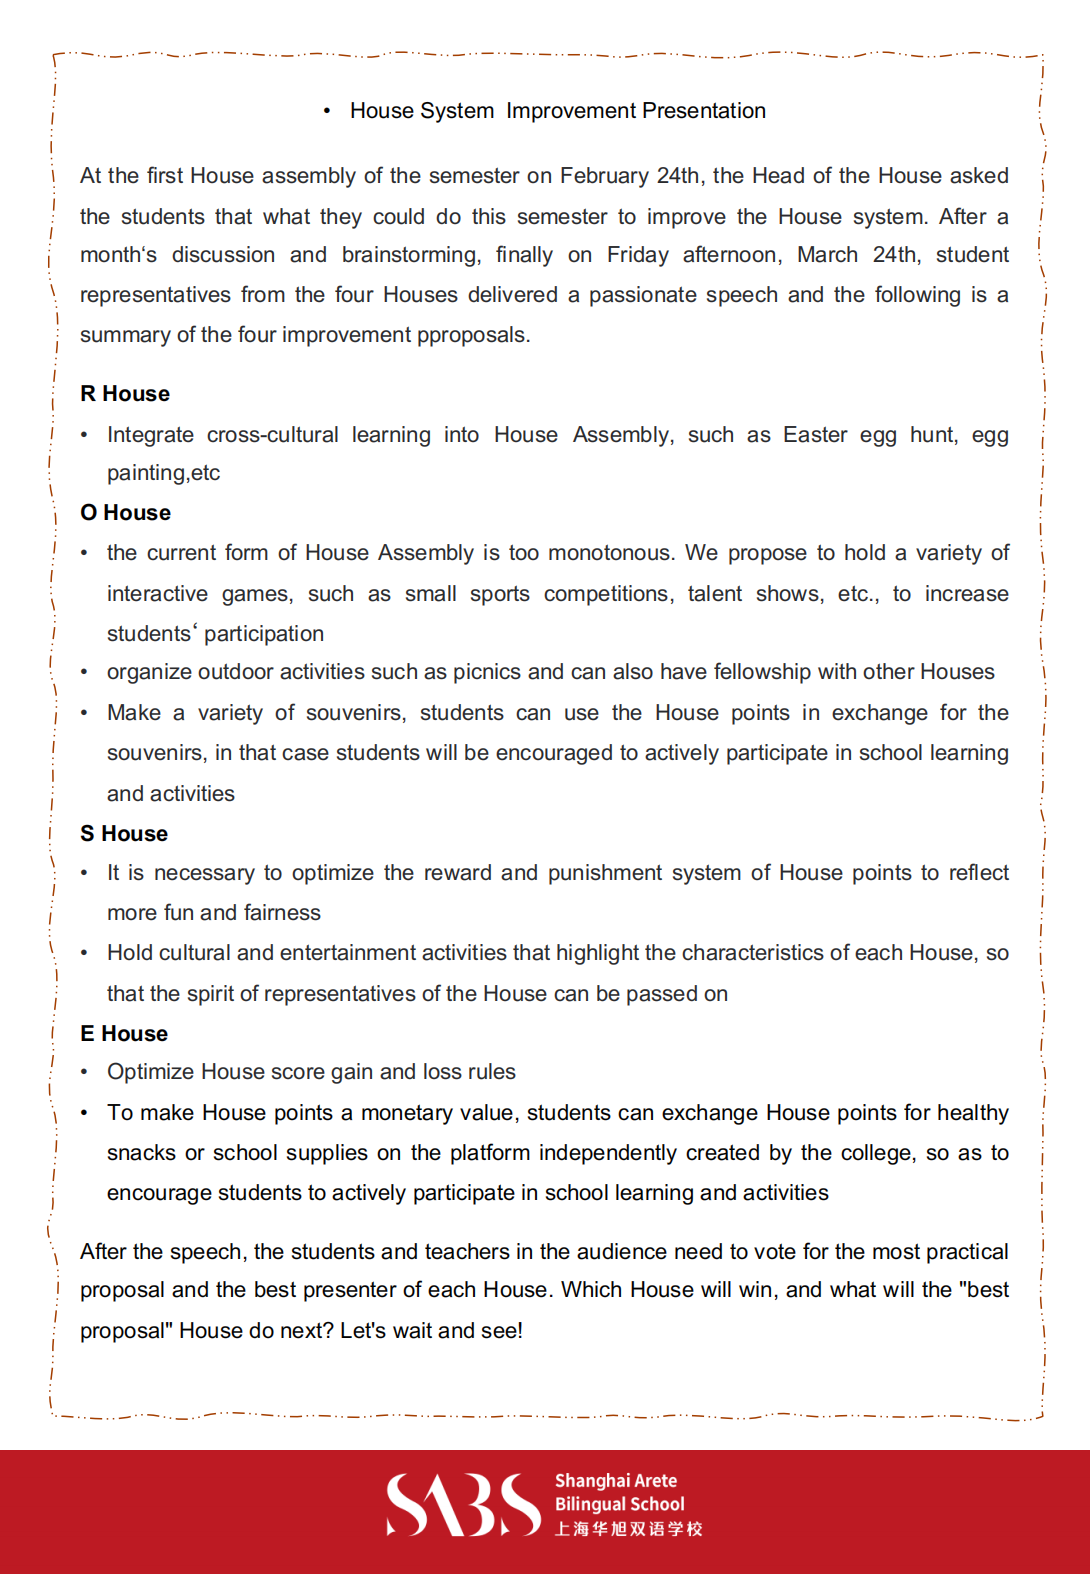 HS 3rd Issue Newsletter pptx（English）_02.png